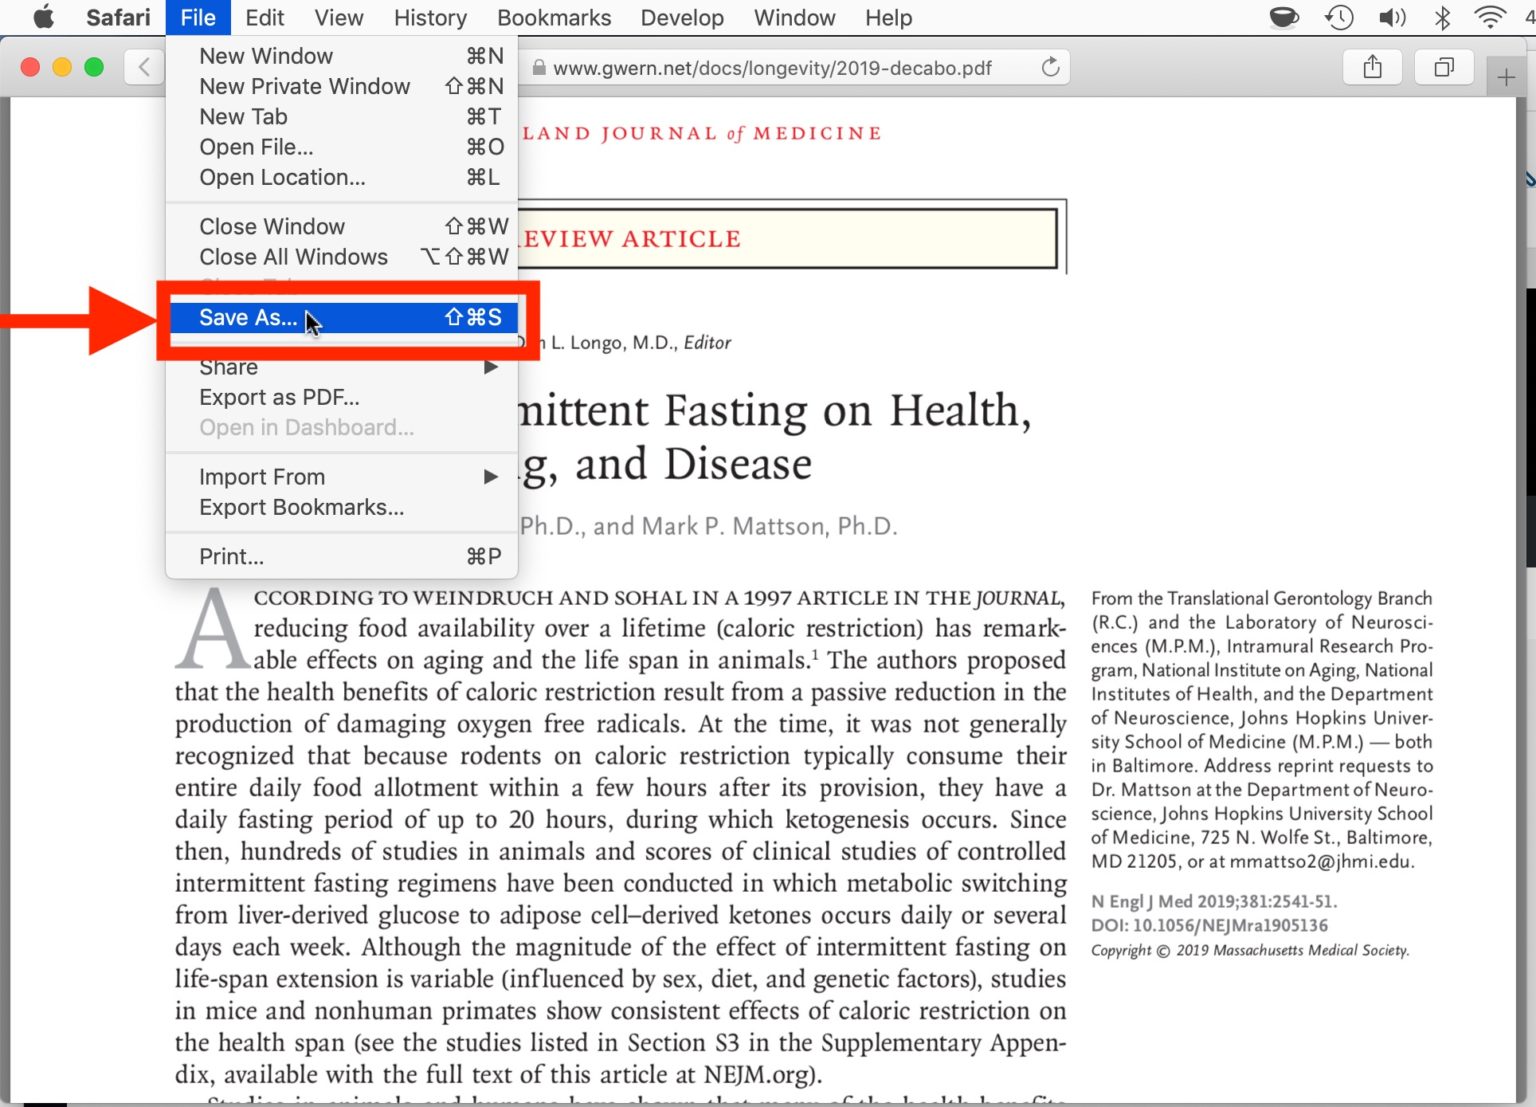 how to download a pdf from safari on mac